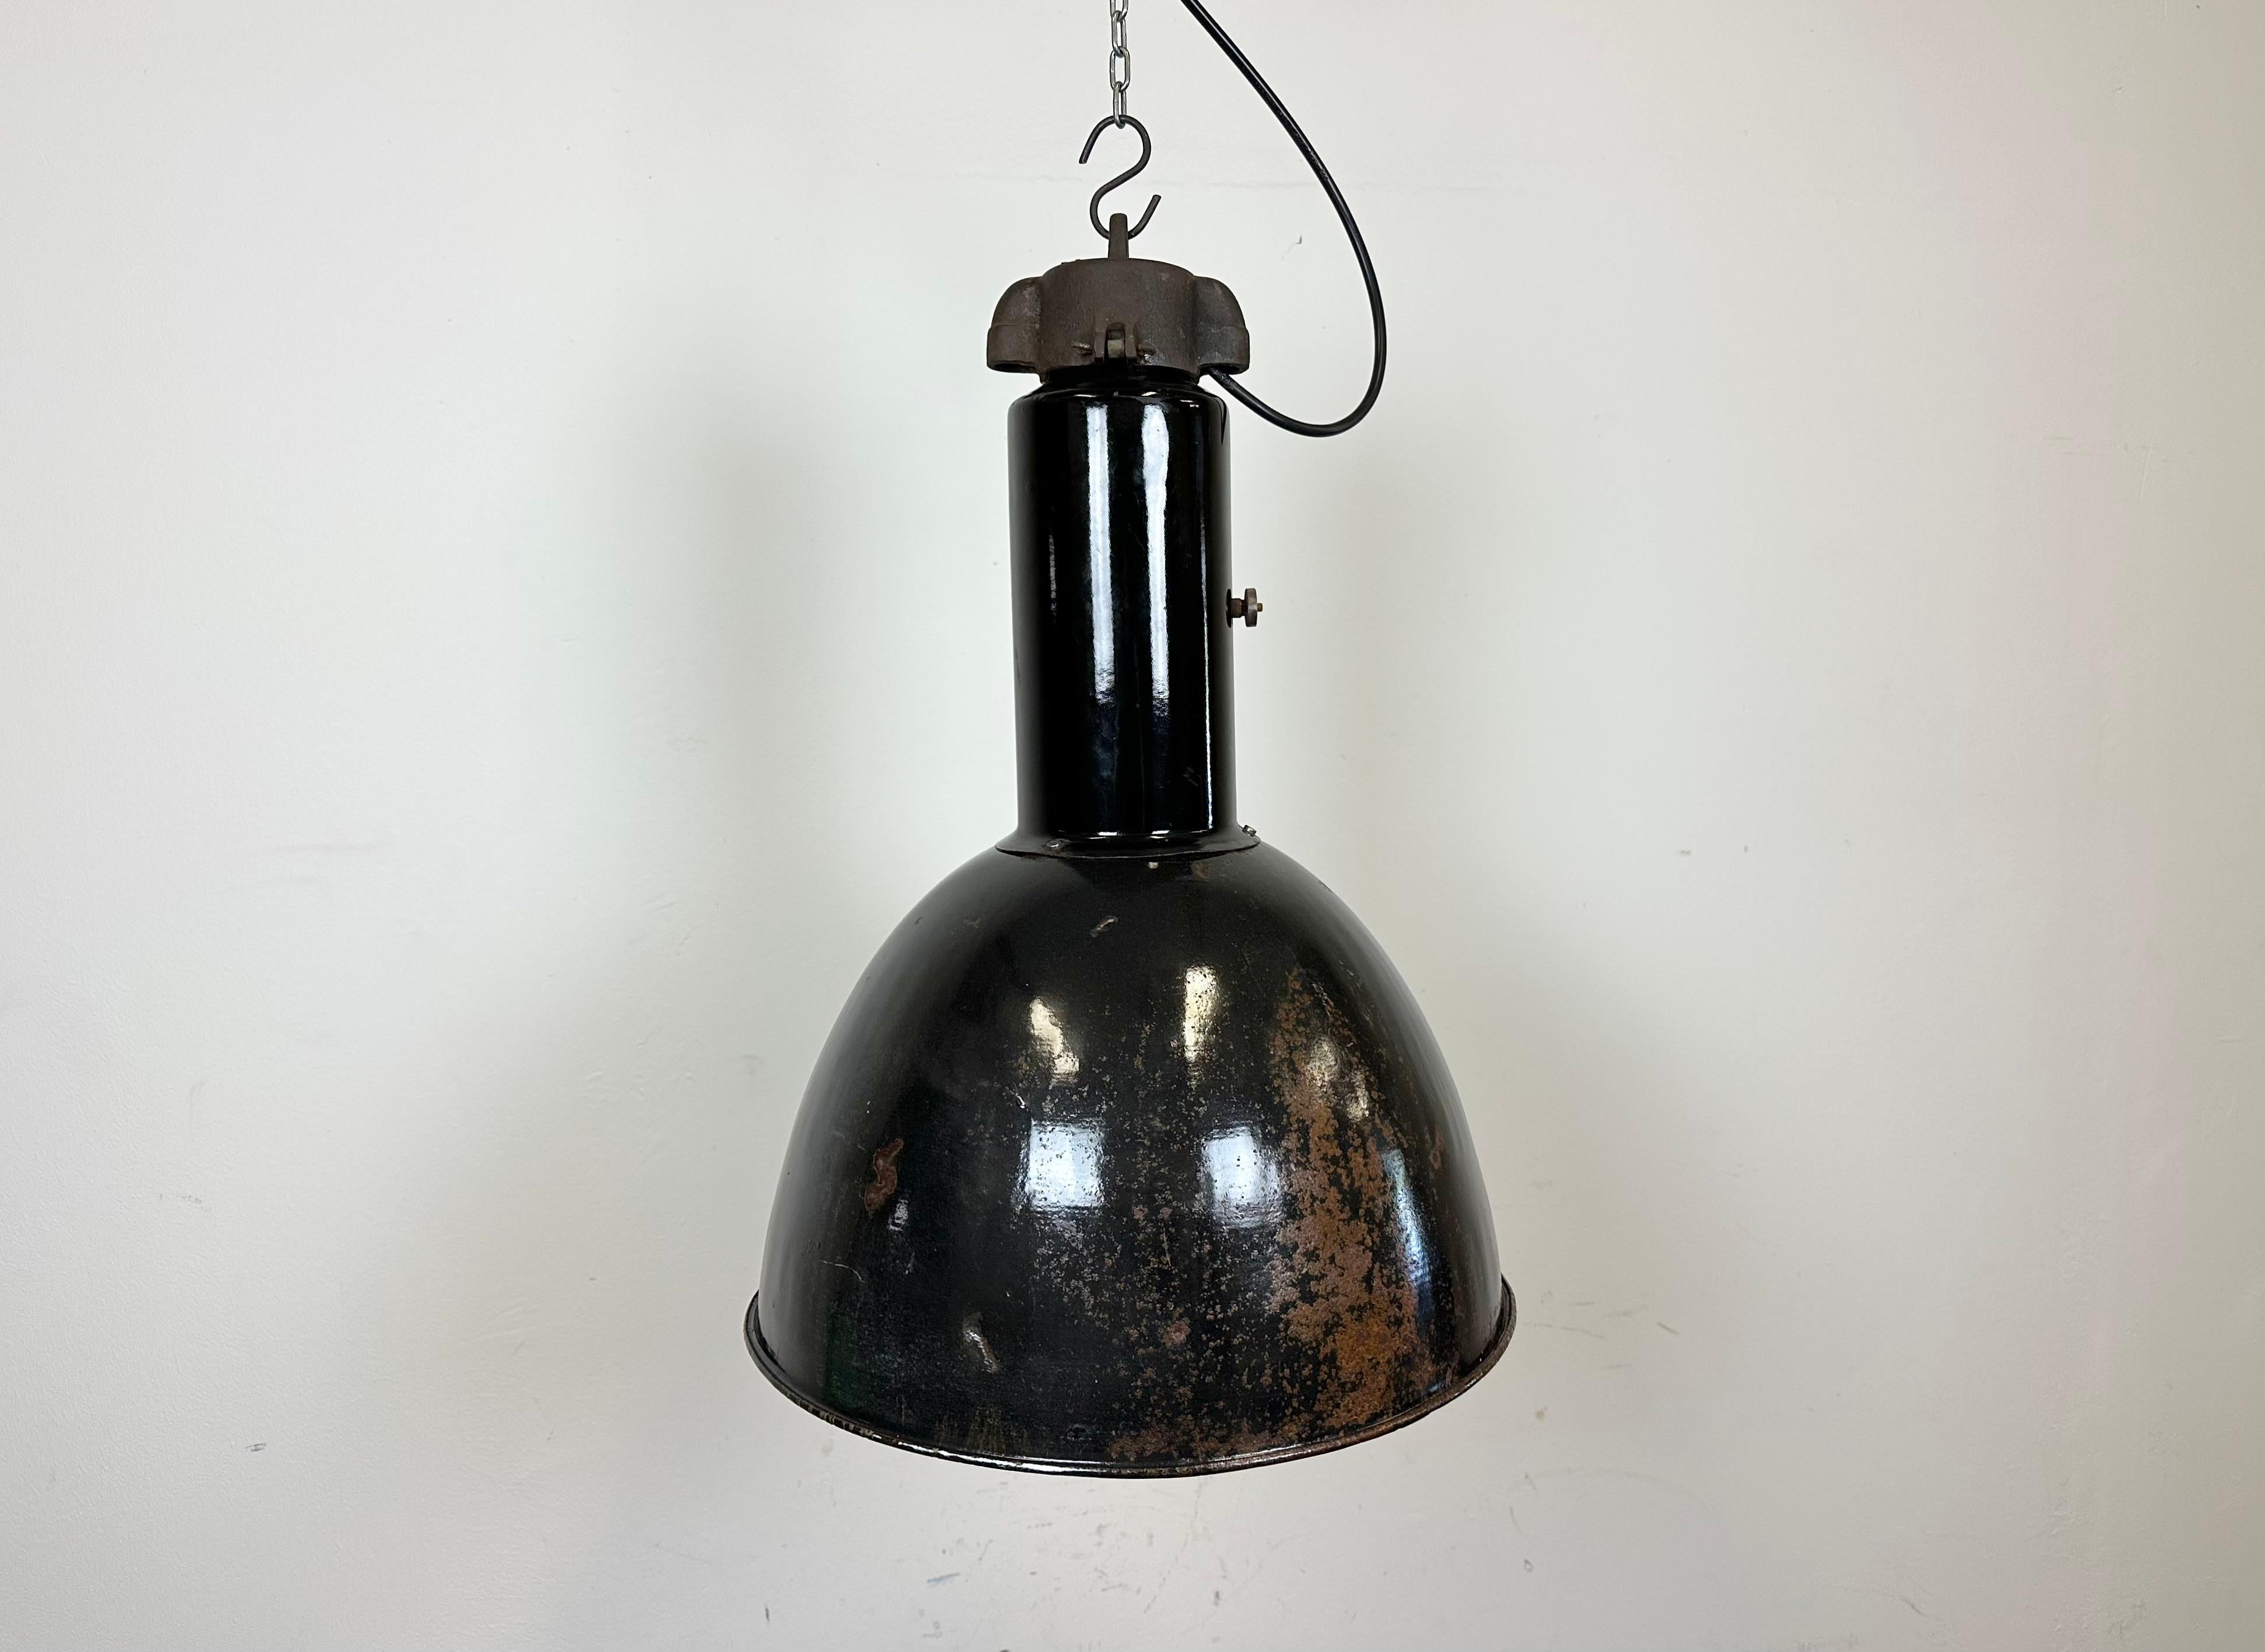 Industrial black enamel pendant lamp made by Elektrosvit in former Czechoslovakia during the 1930s -1970s. Designed in the period of Bauhaus. White enamel inside the shade. Cast iron top. New porcelain socket requires standard  E 27/ E 26